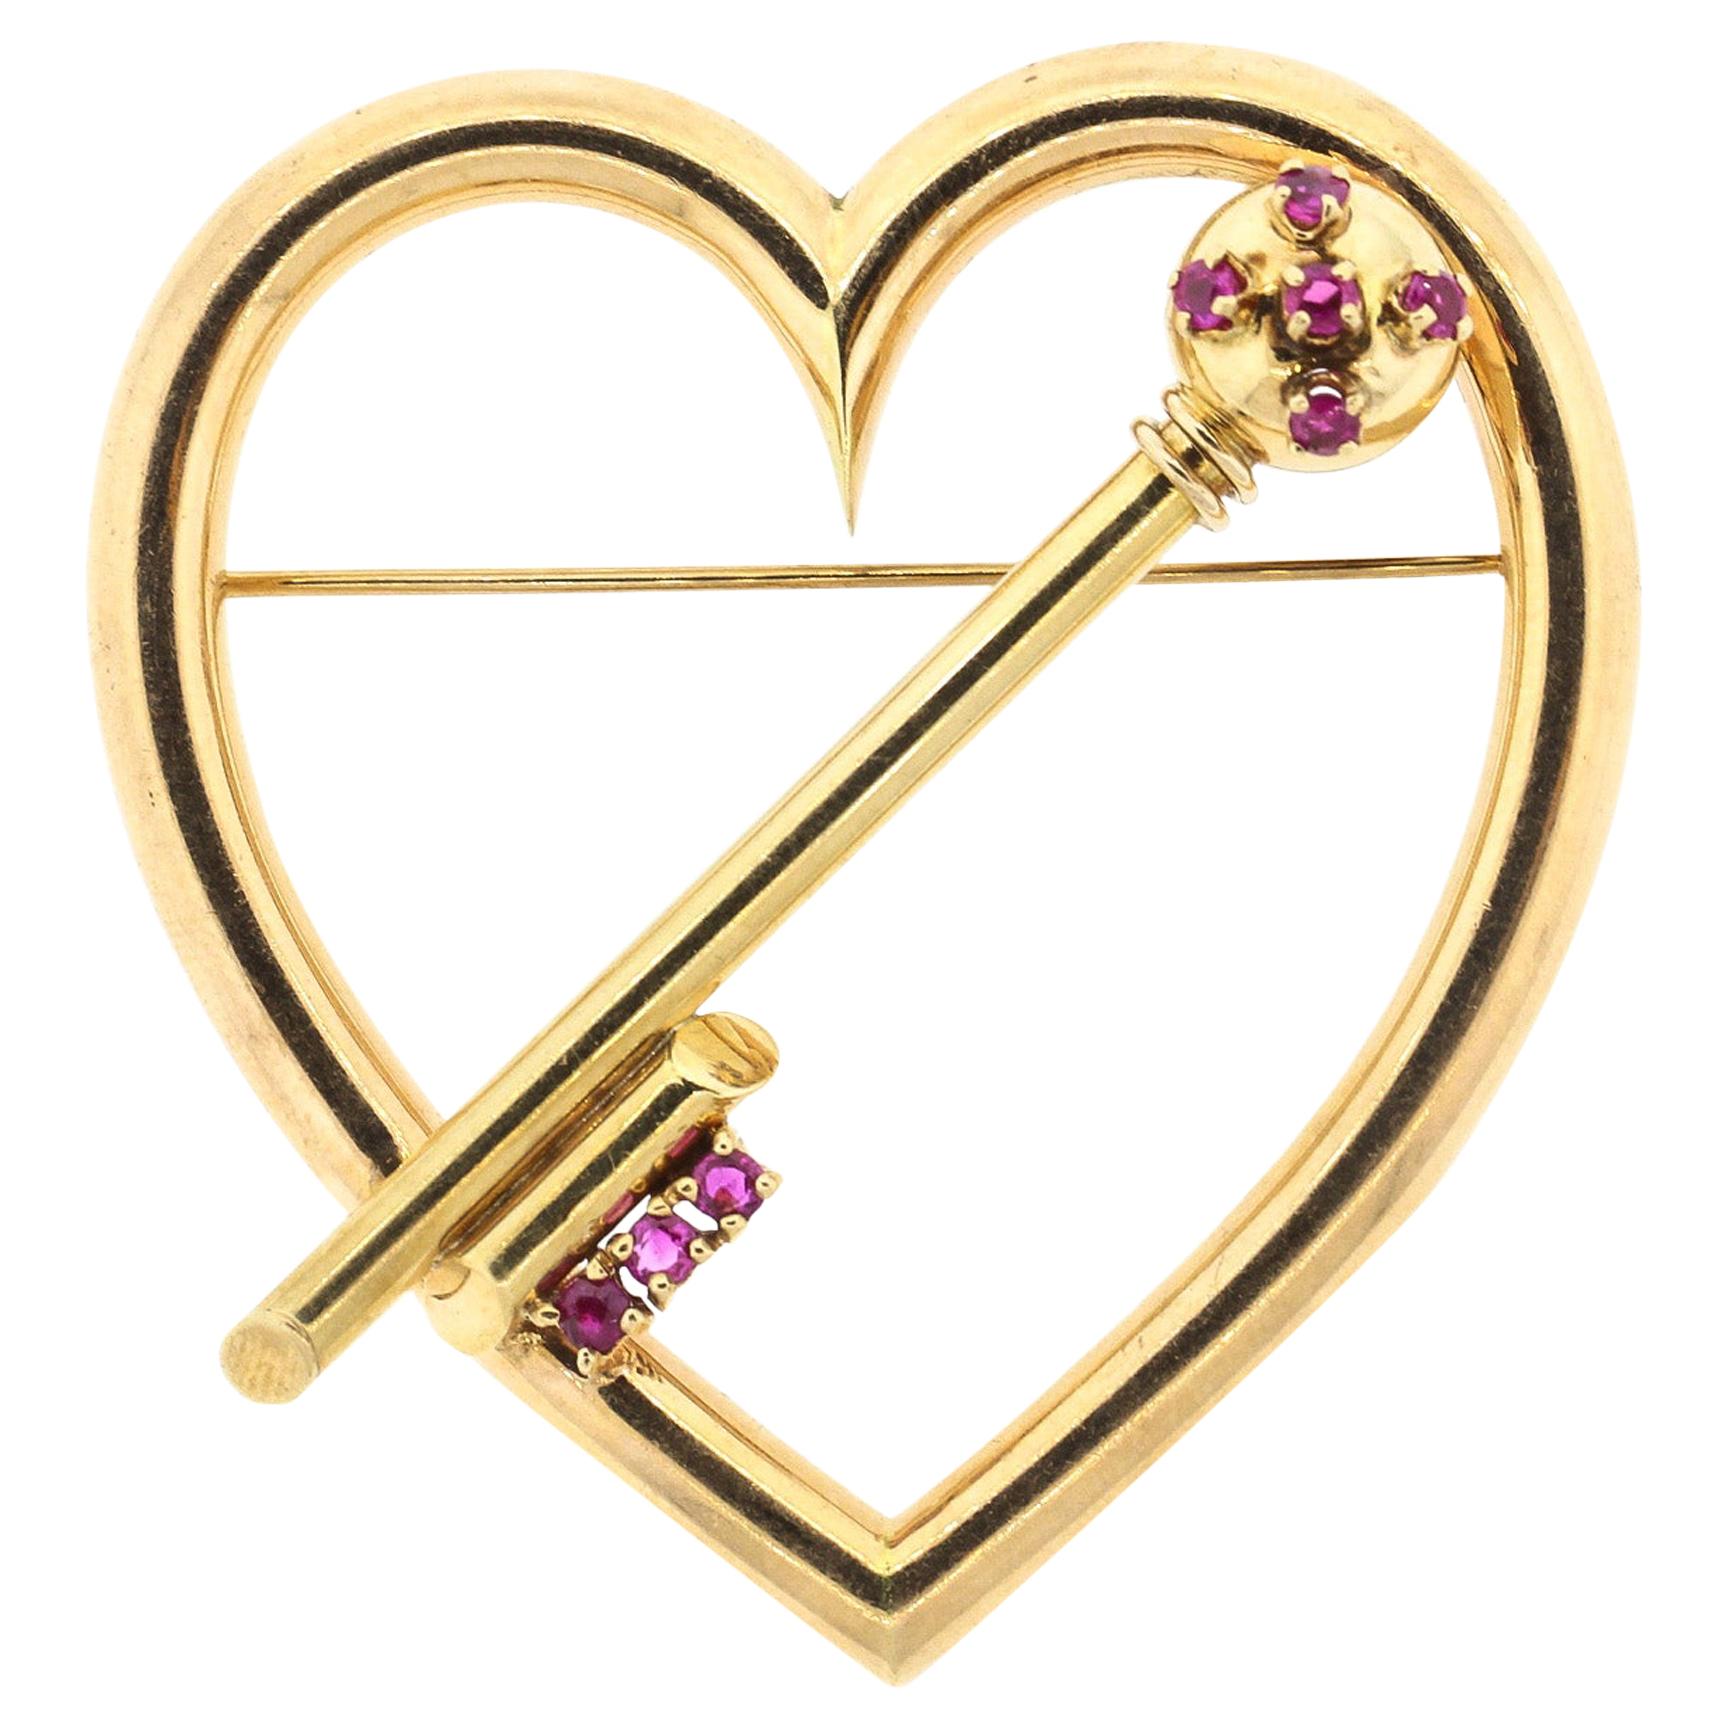 Antique Retro 14 Karat Gold Ruby Heart and Key Brooch For Sale